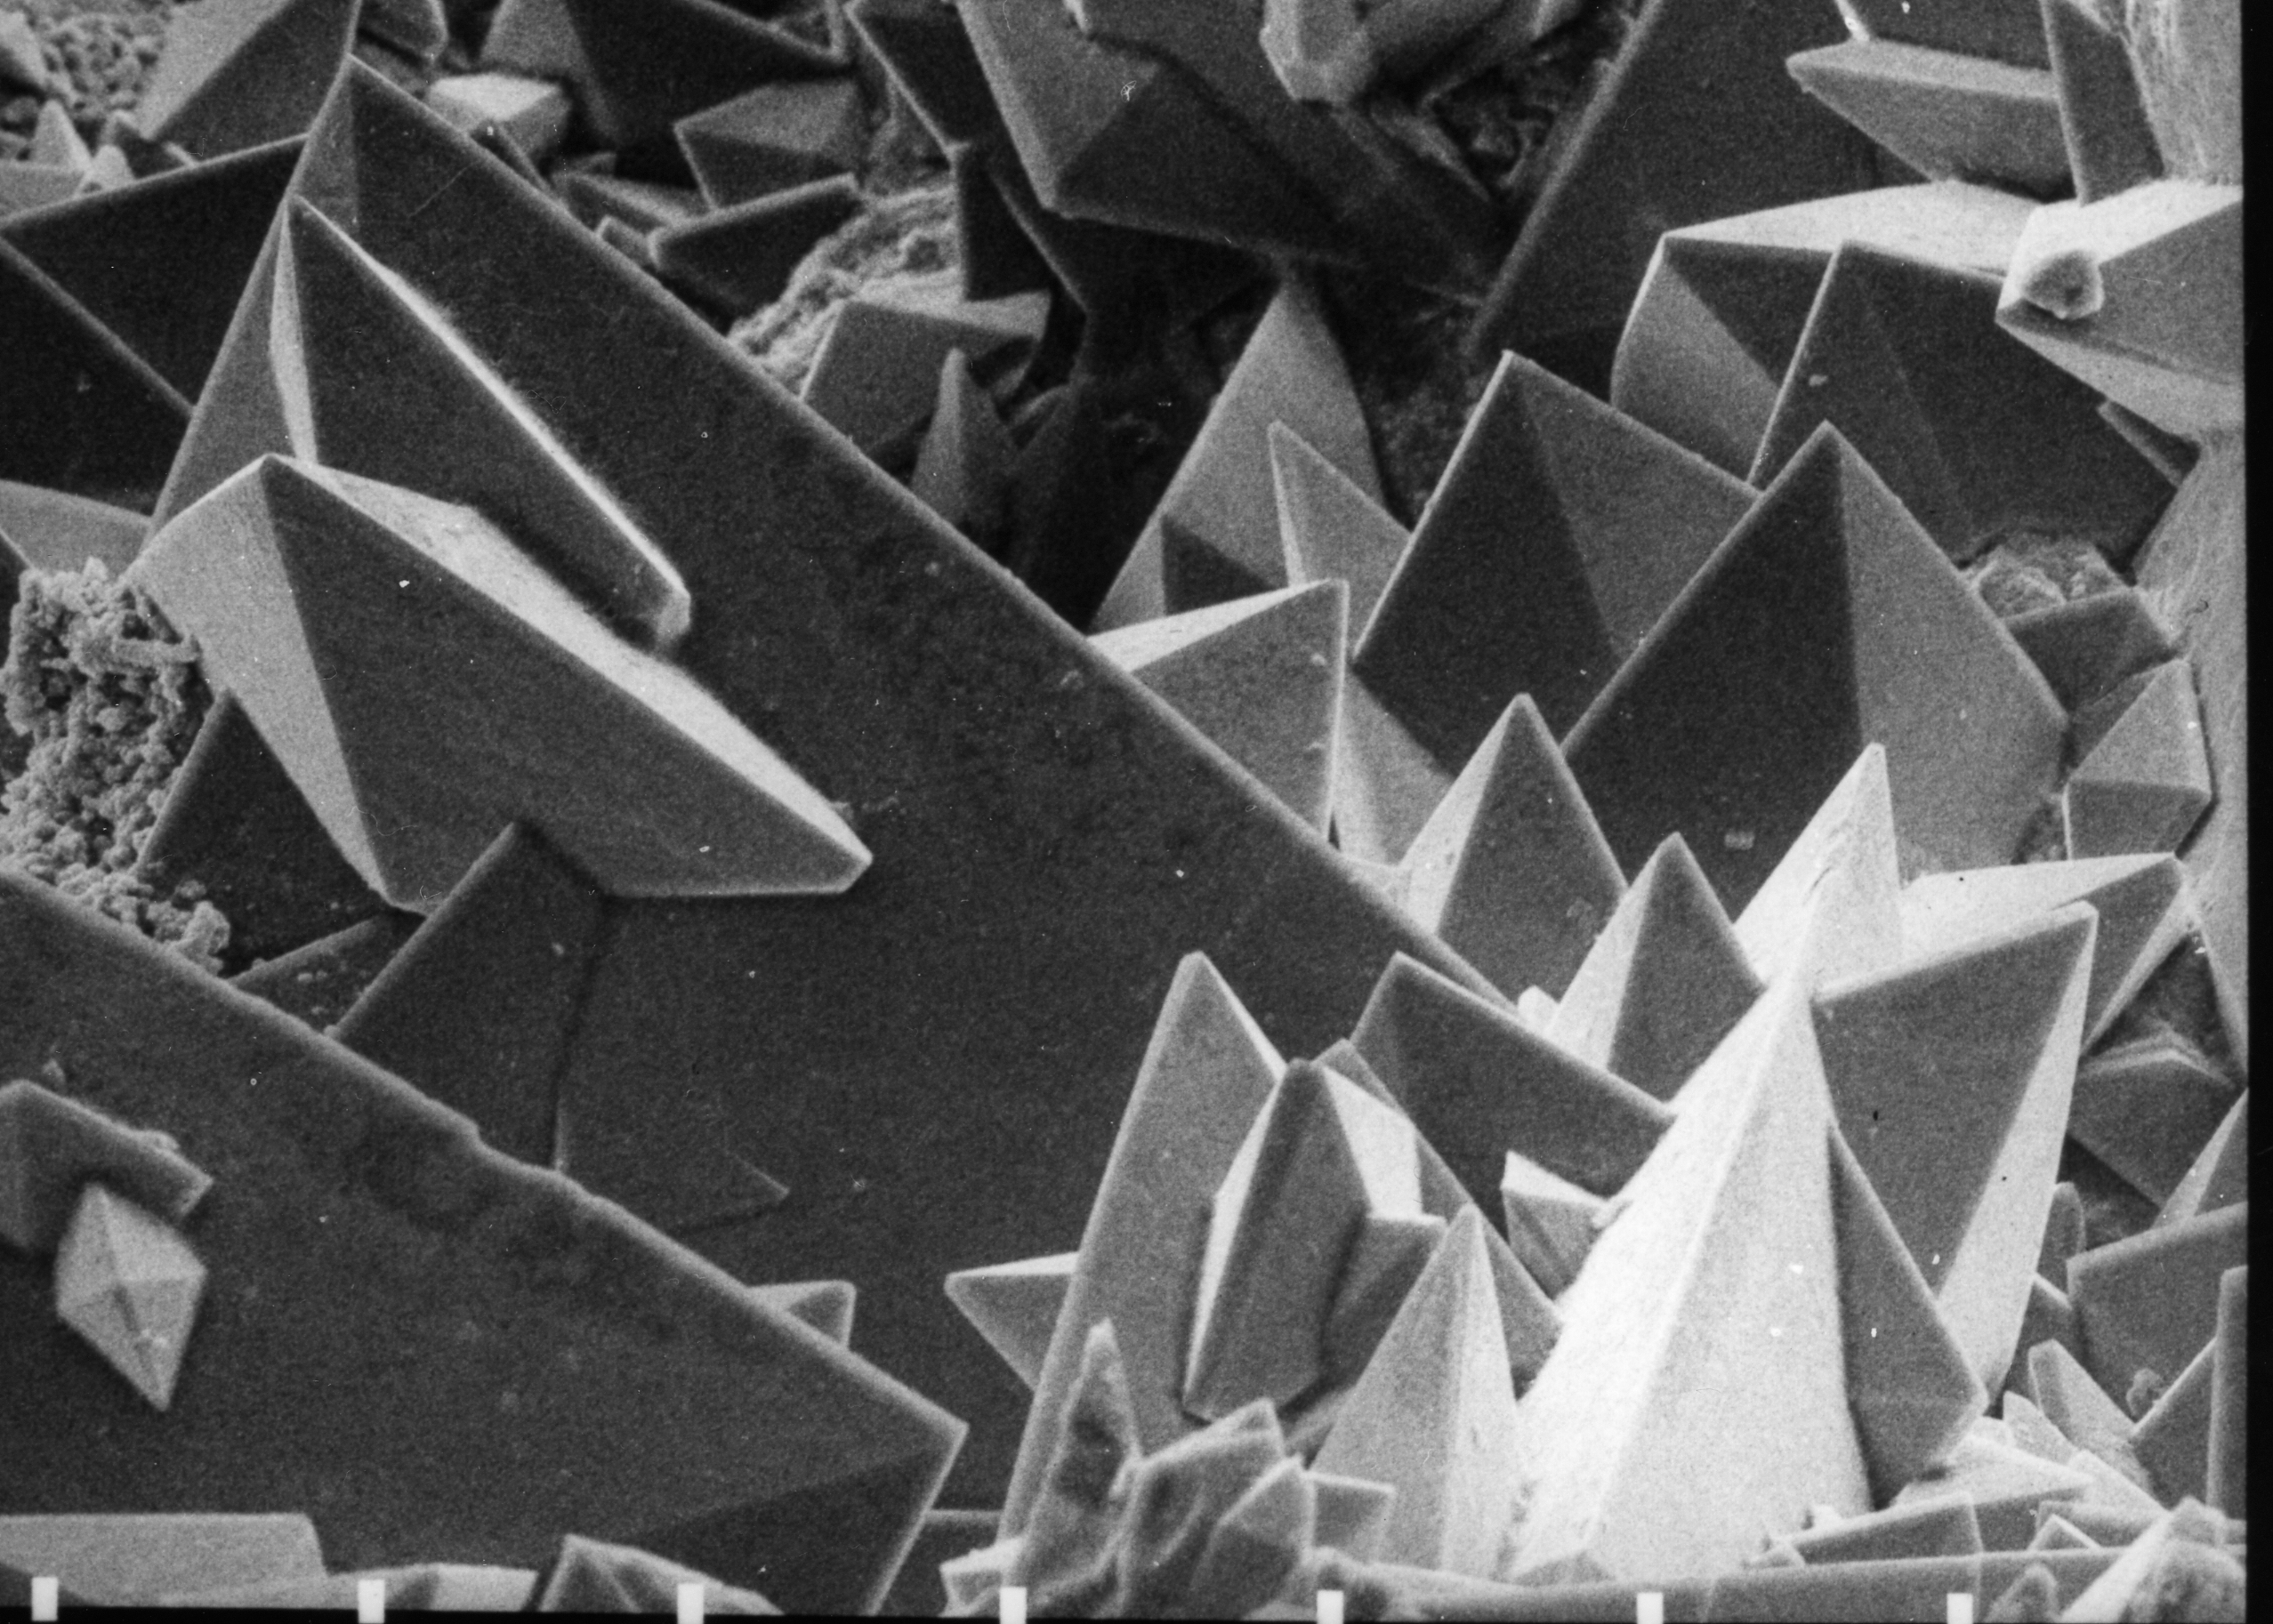 Calcium oxalate dihydrate crystals under Scanning Electron Micrograph (SEM) taken at 30 KV. Source: Wikimedia commons[11]